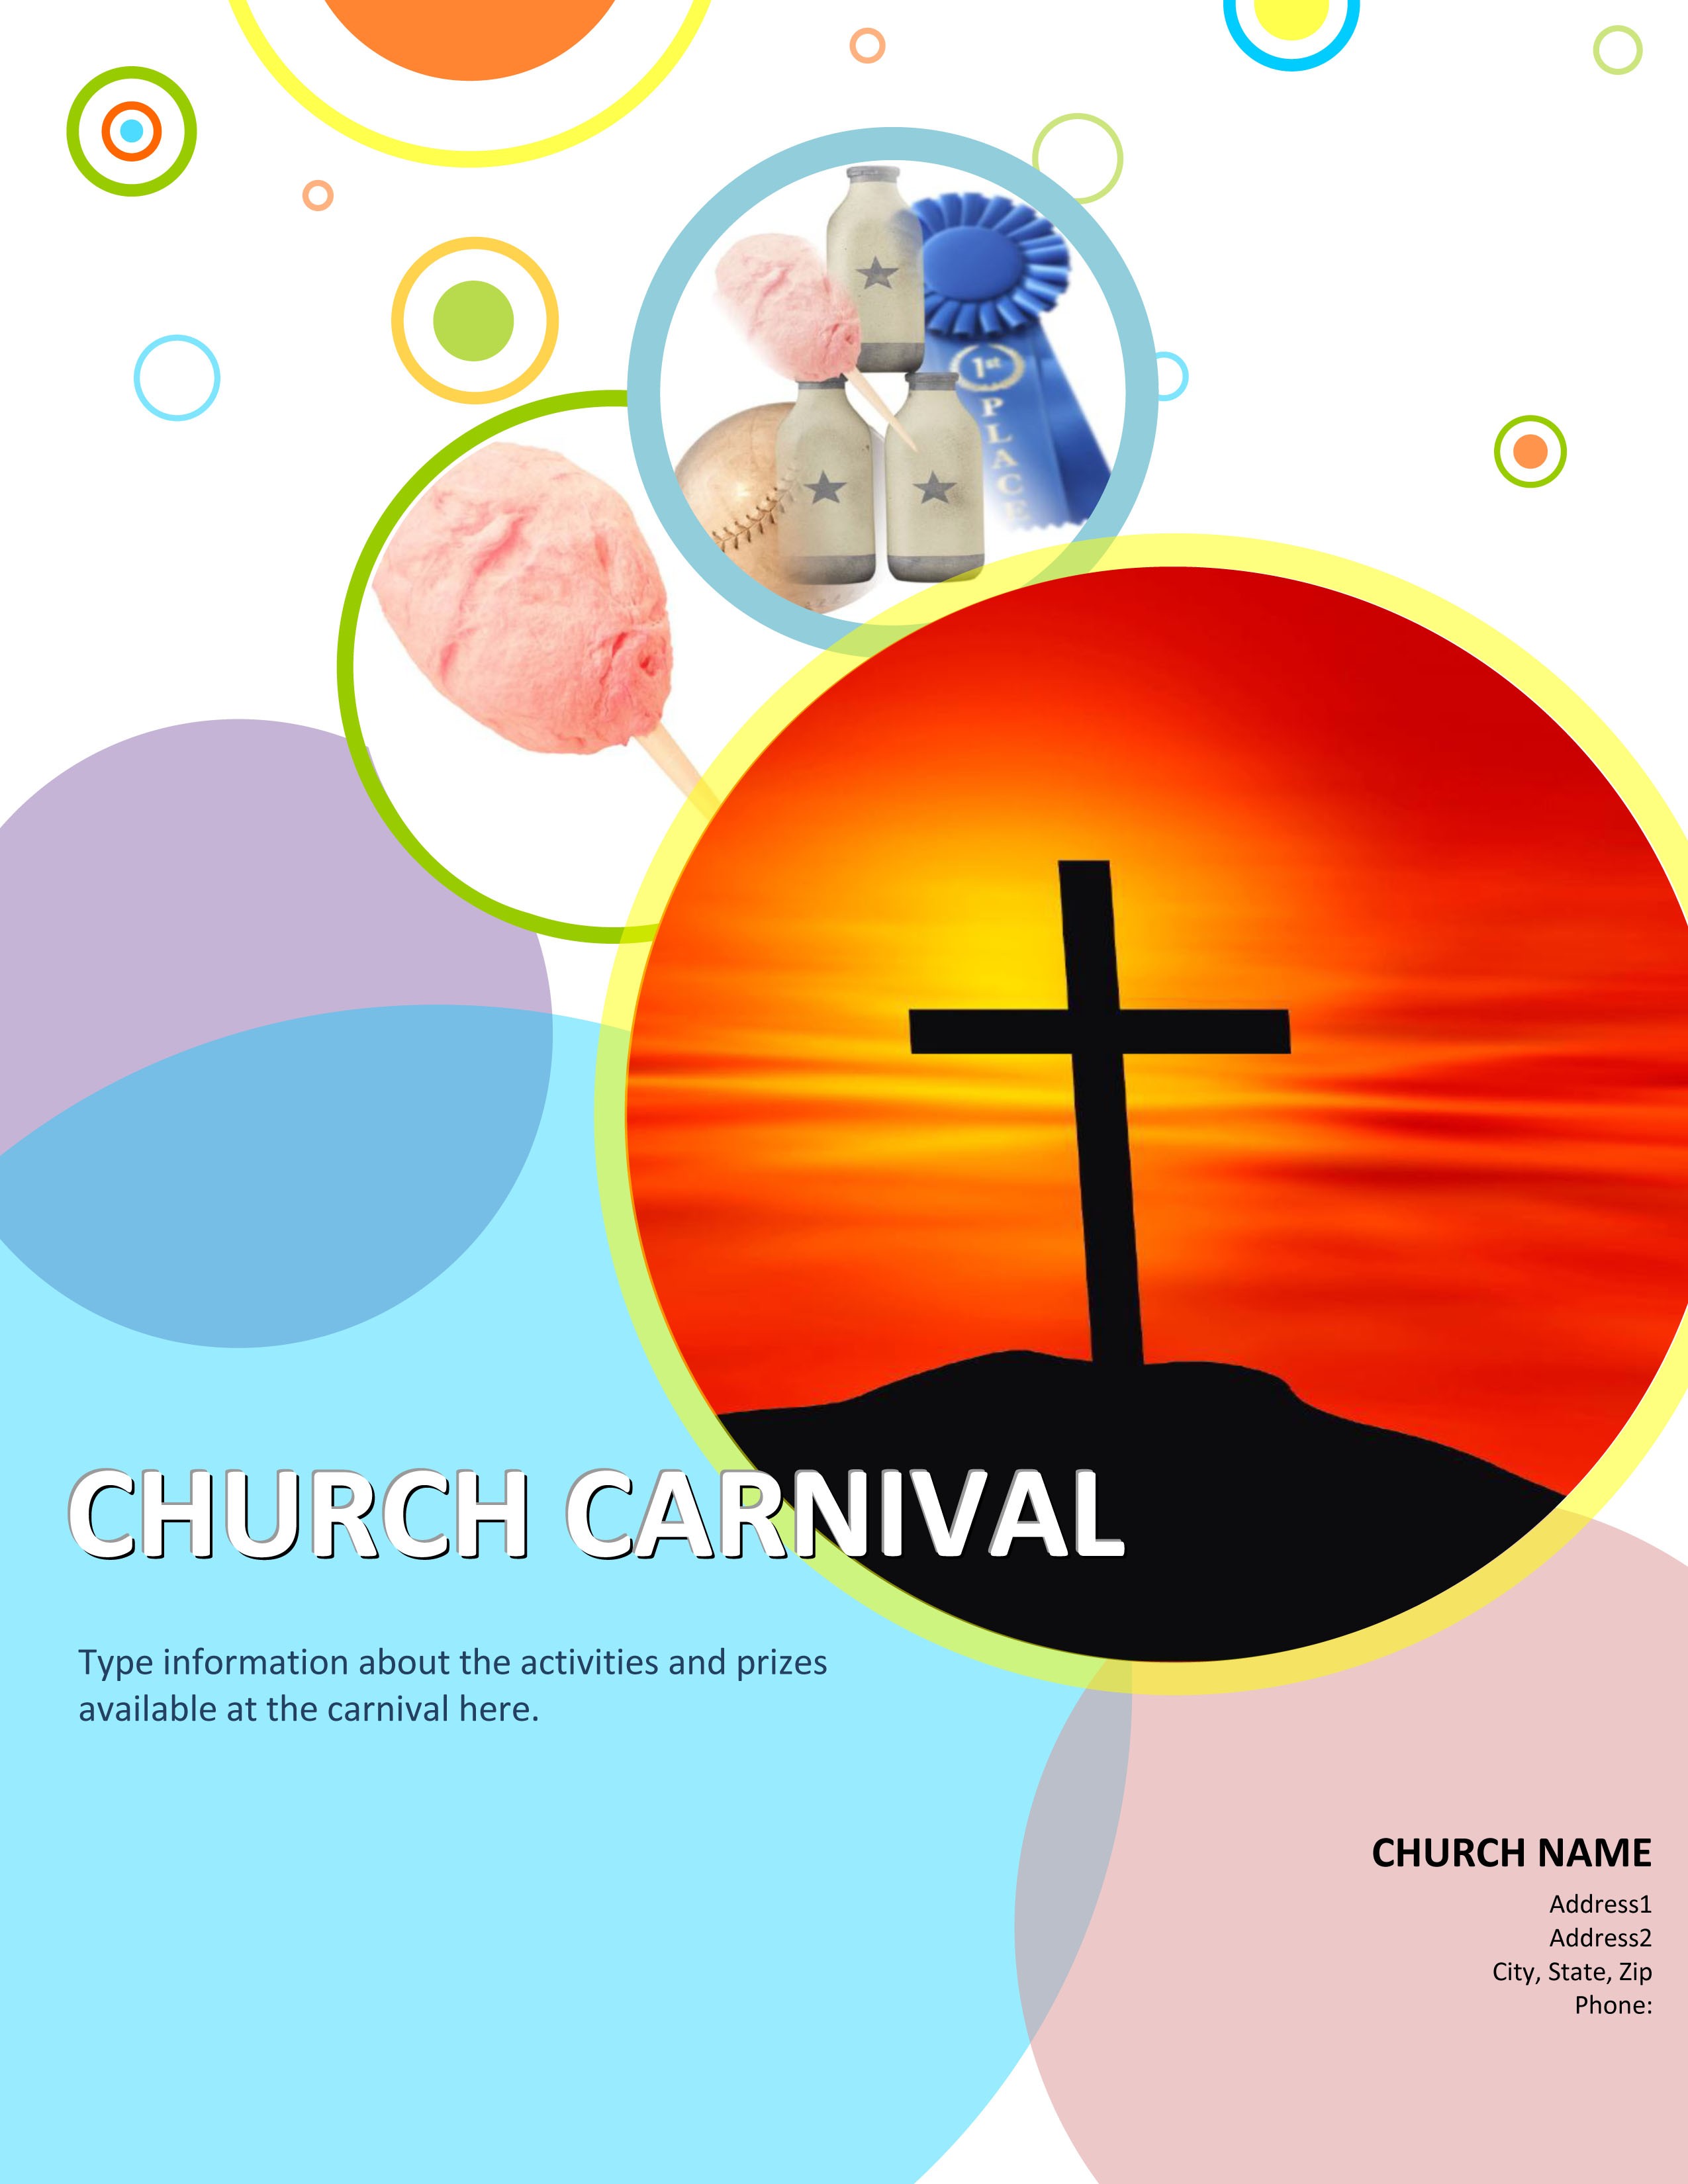 3 Church Carnival Flyer Templates Using Microsoft Office Free Printable Flyers